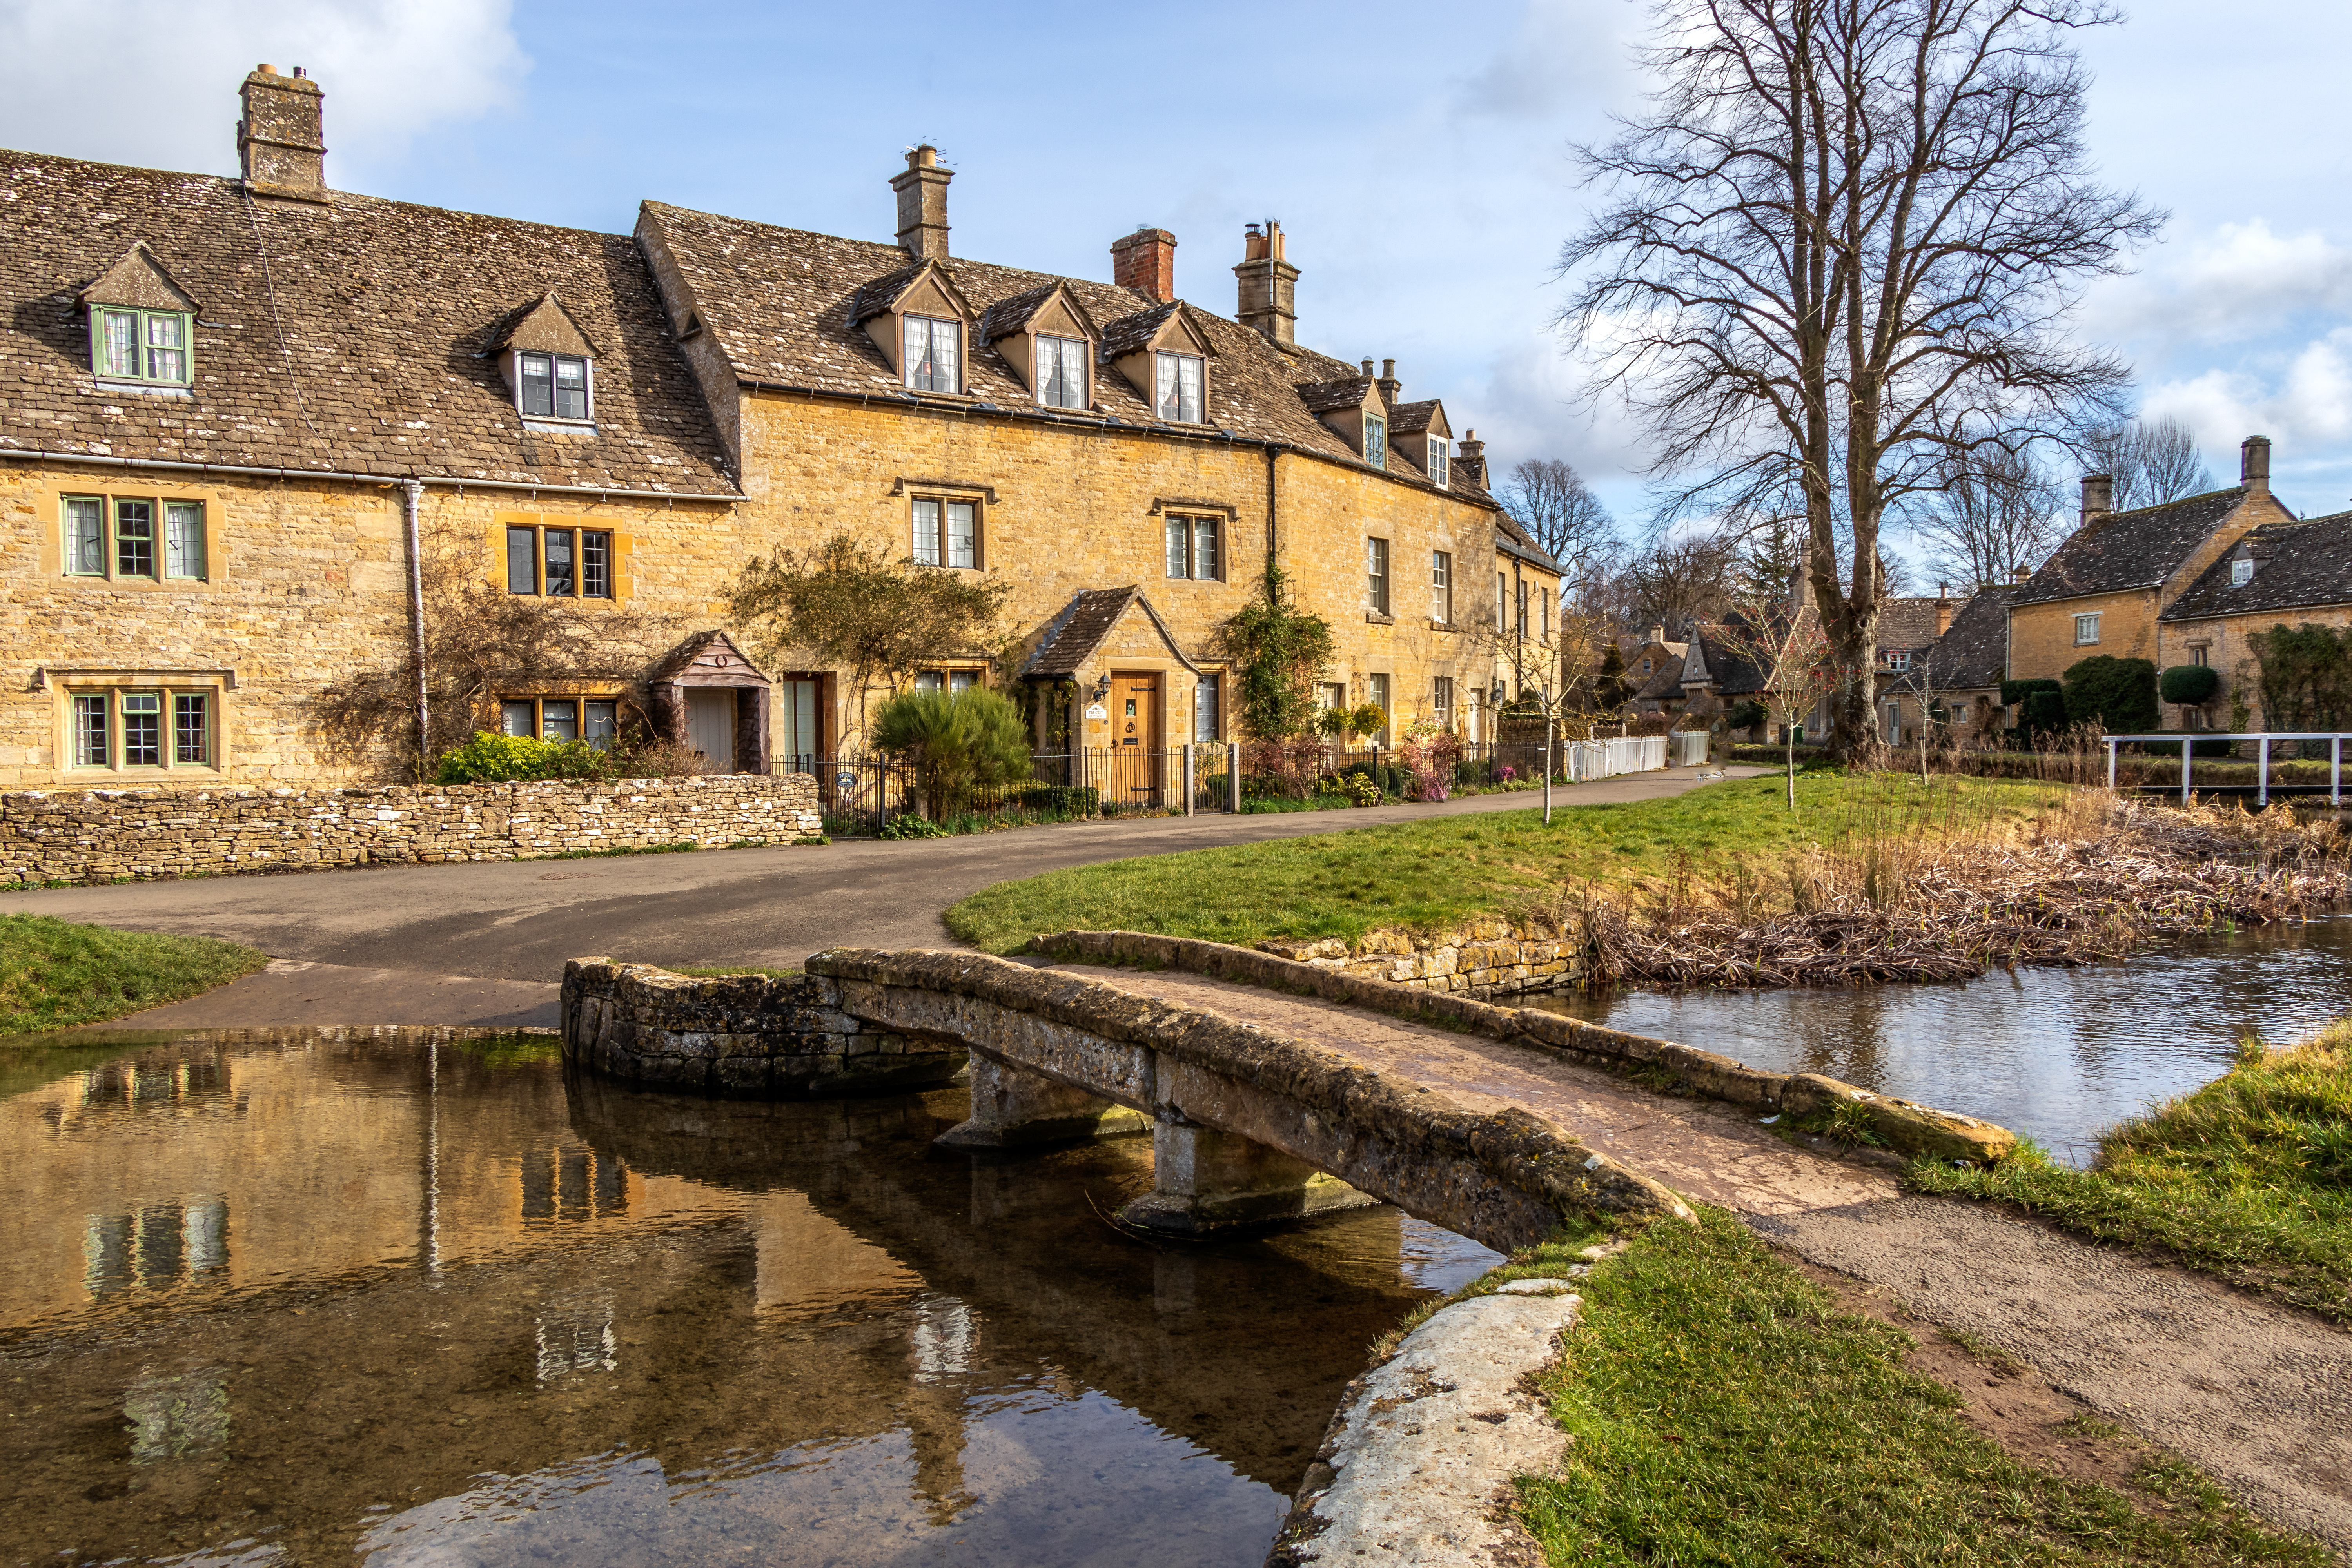 Cotswold village of Lower Slaughter, Gloucestershire, England